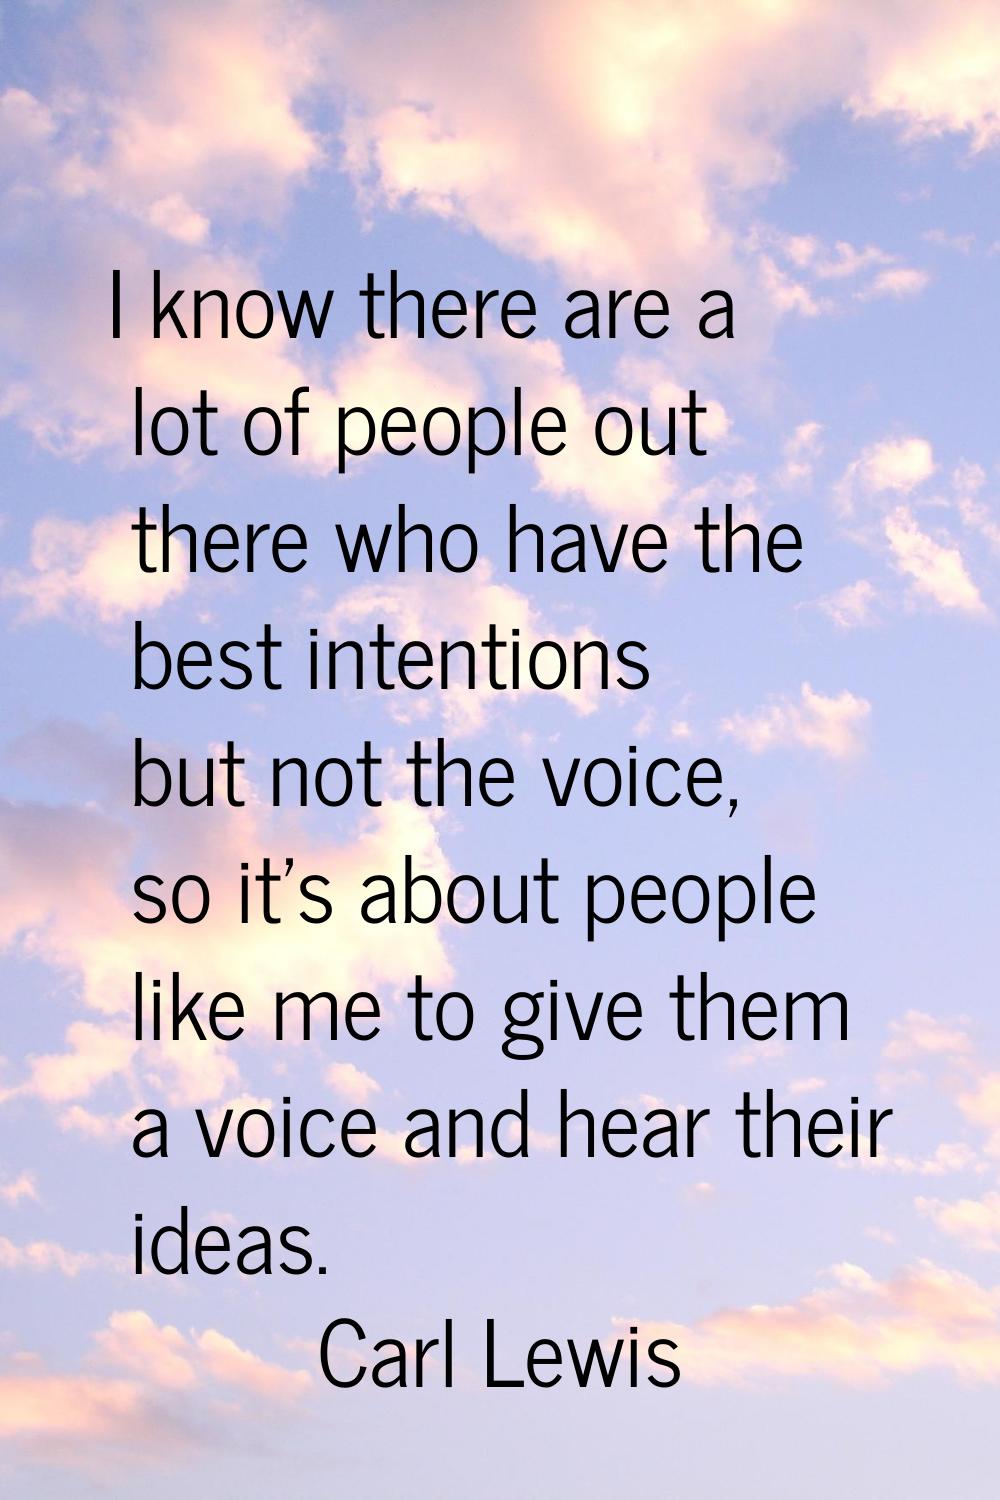 I know there are a lot of people out there who have the best intentions but not the voice, so it's 